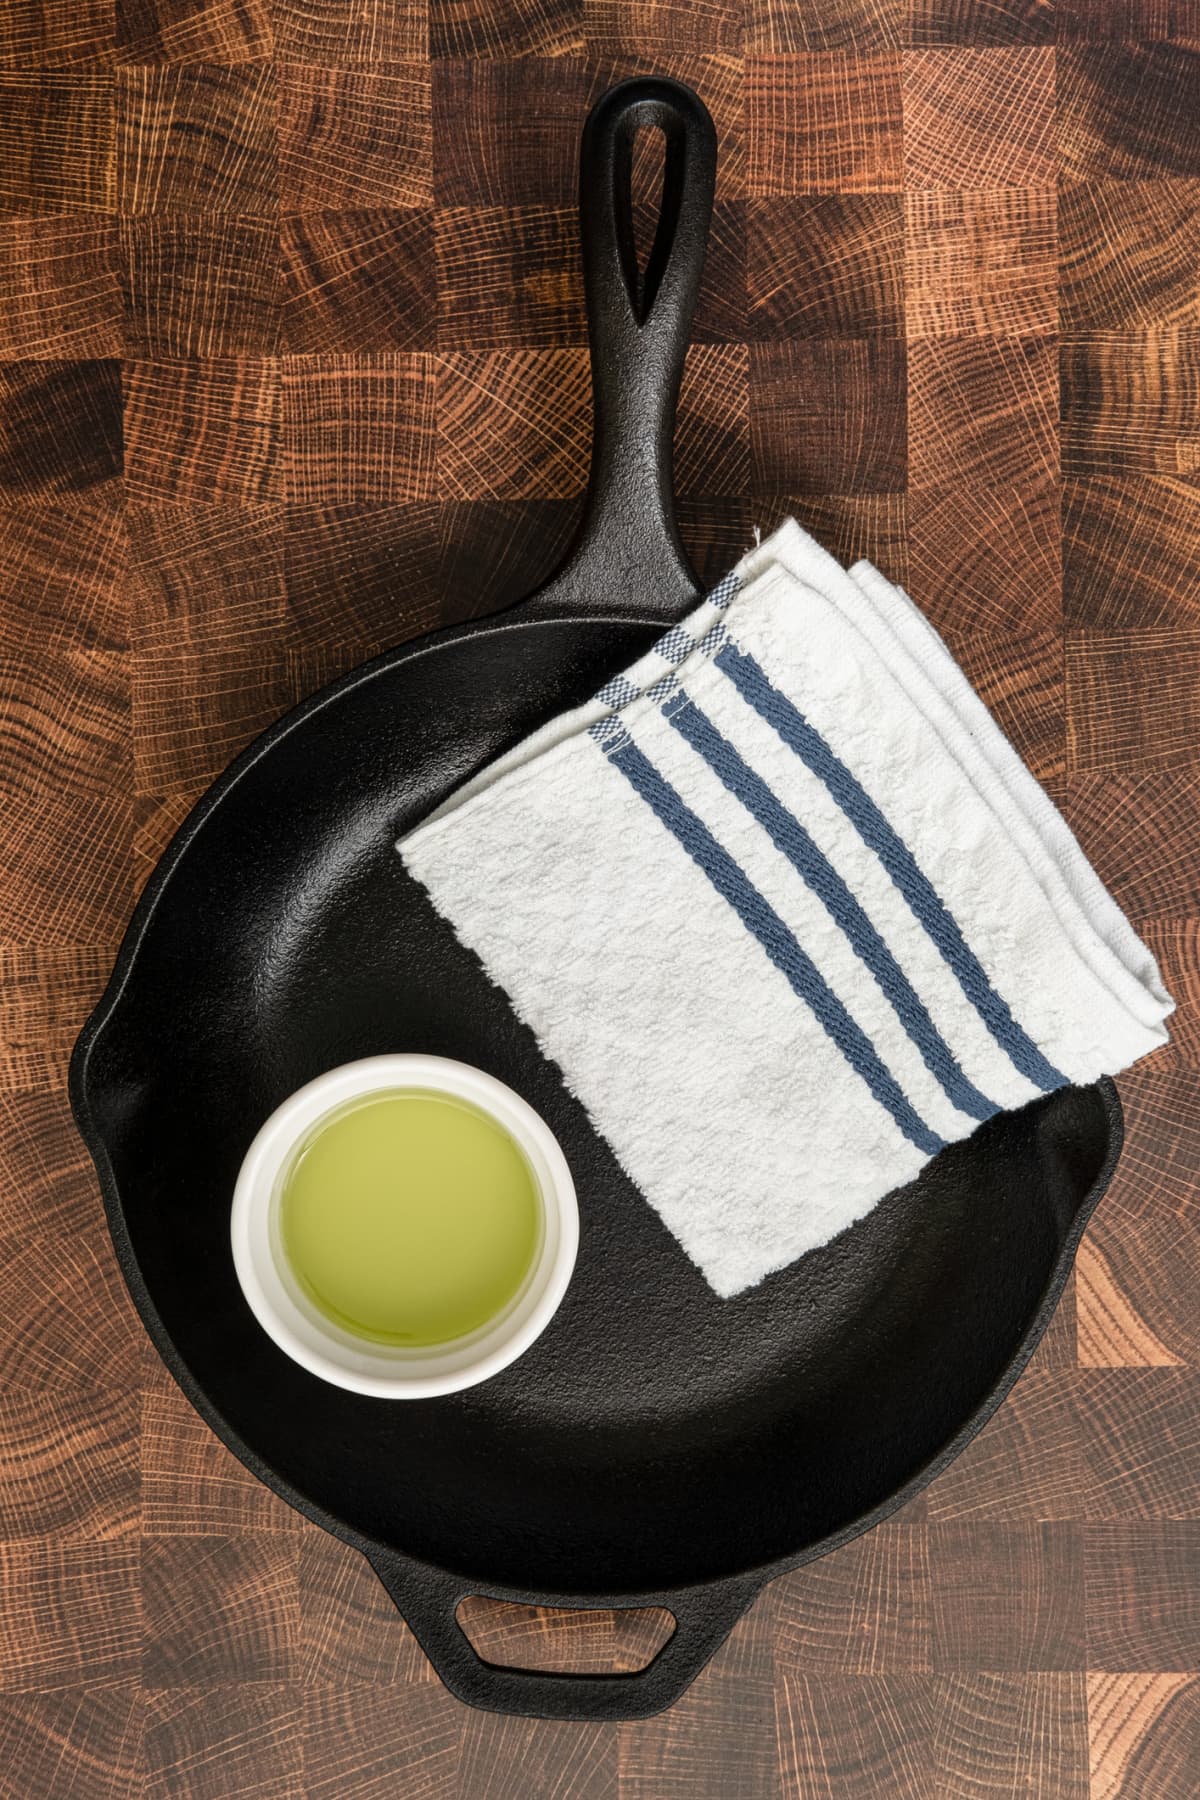 A cast-iron skillet with a cup of grapeseed oil and a towel on a brown surface